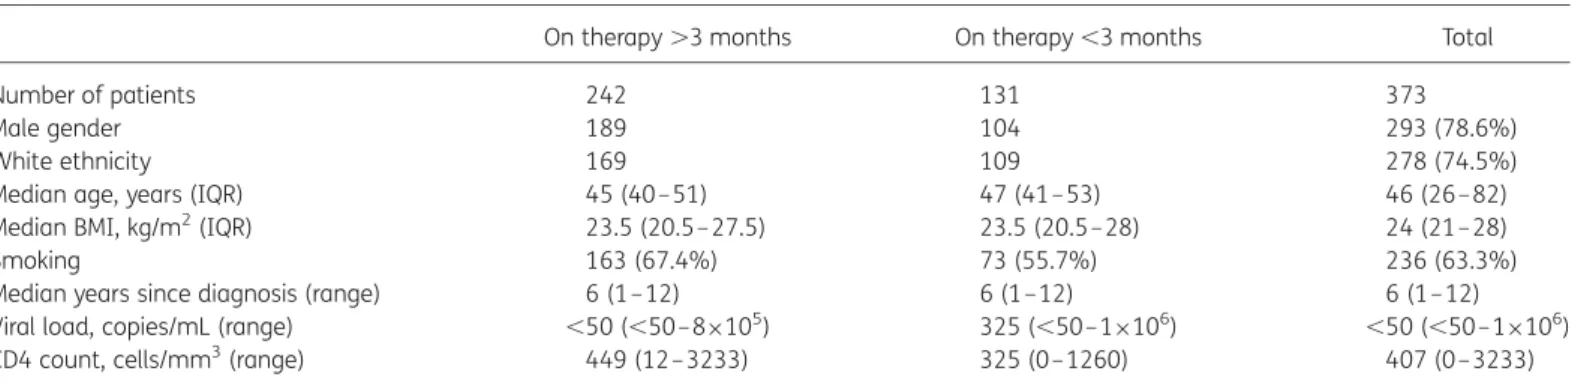 Table 1. Baseline characteristics of patients with stable efavirenz therapy and with early treatment discontinuation of efavirenz